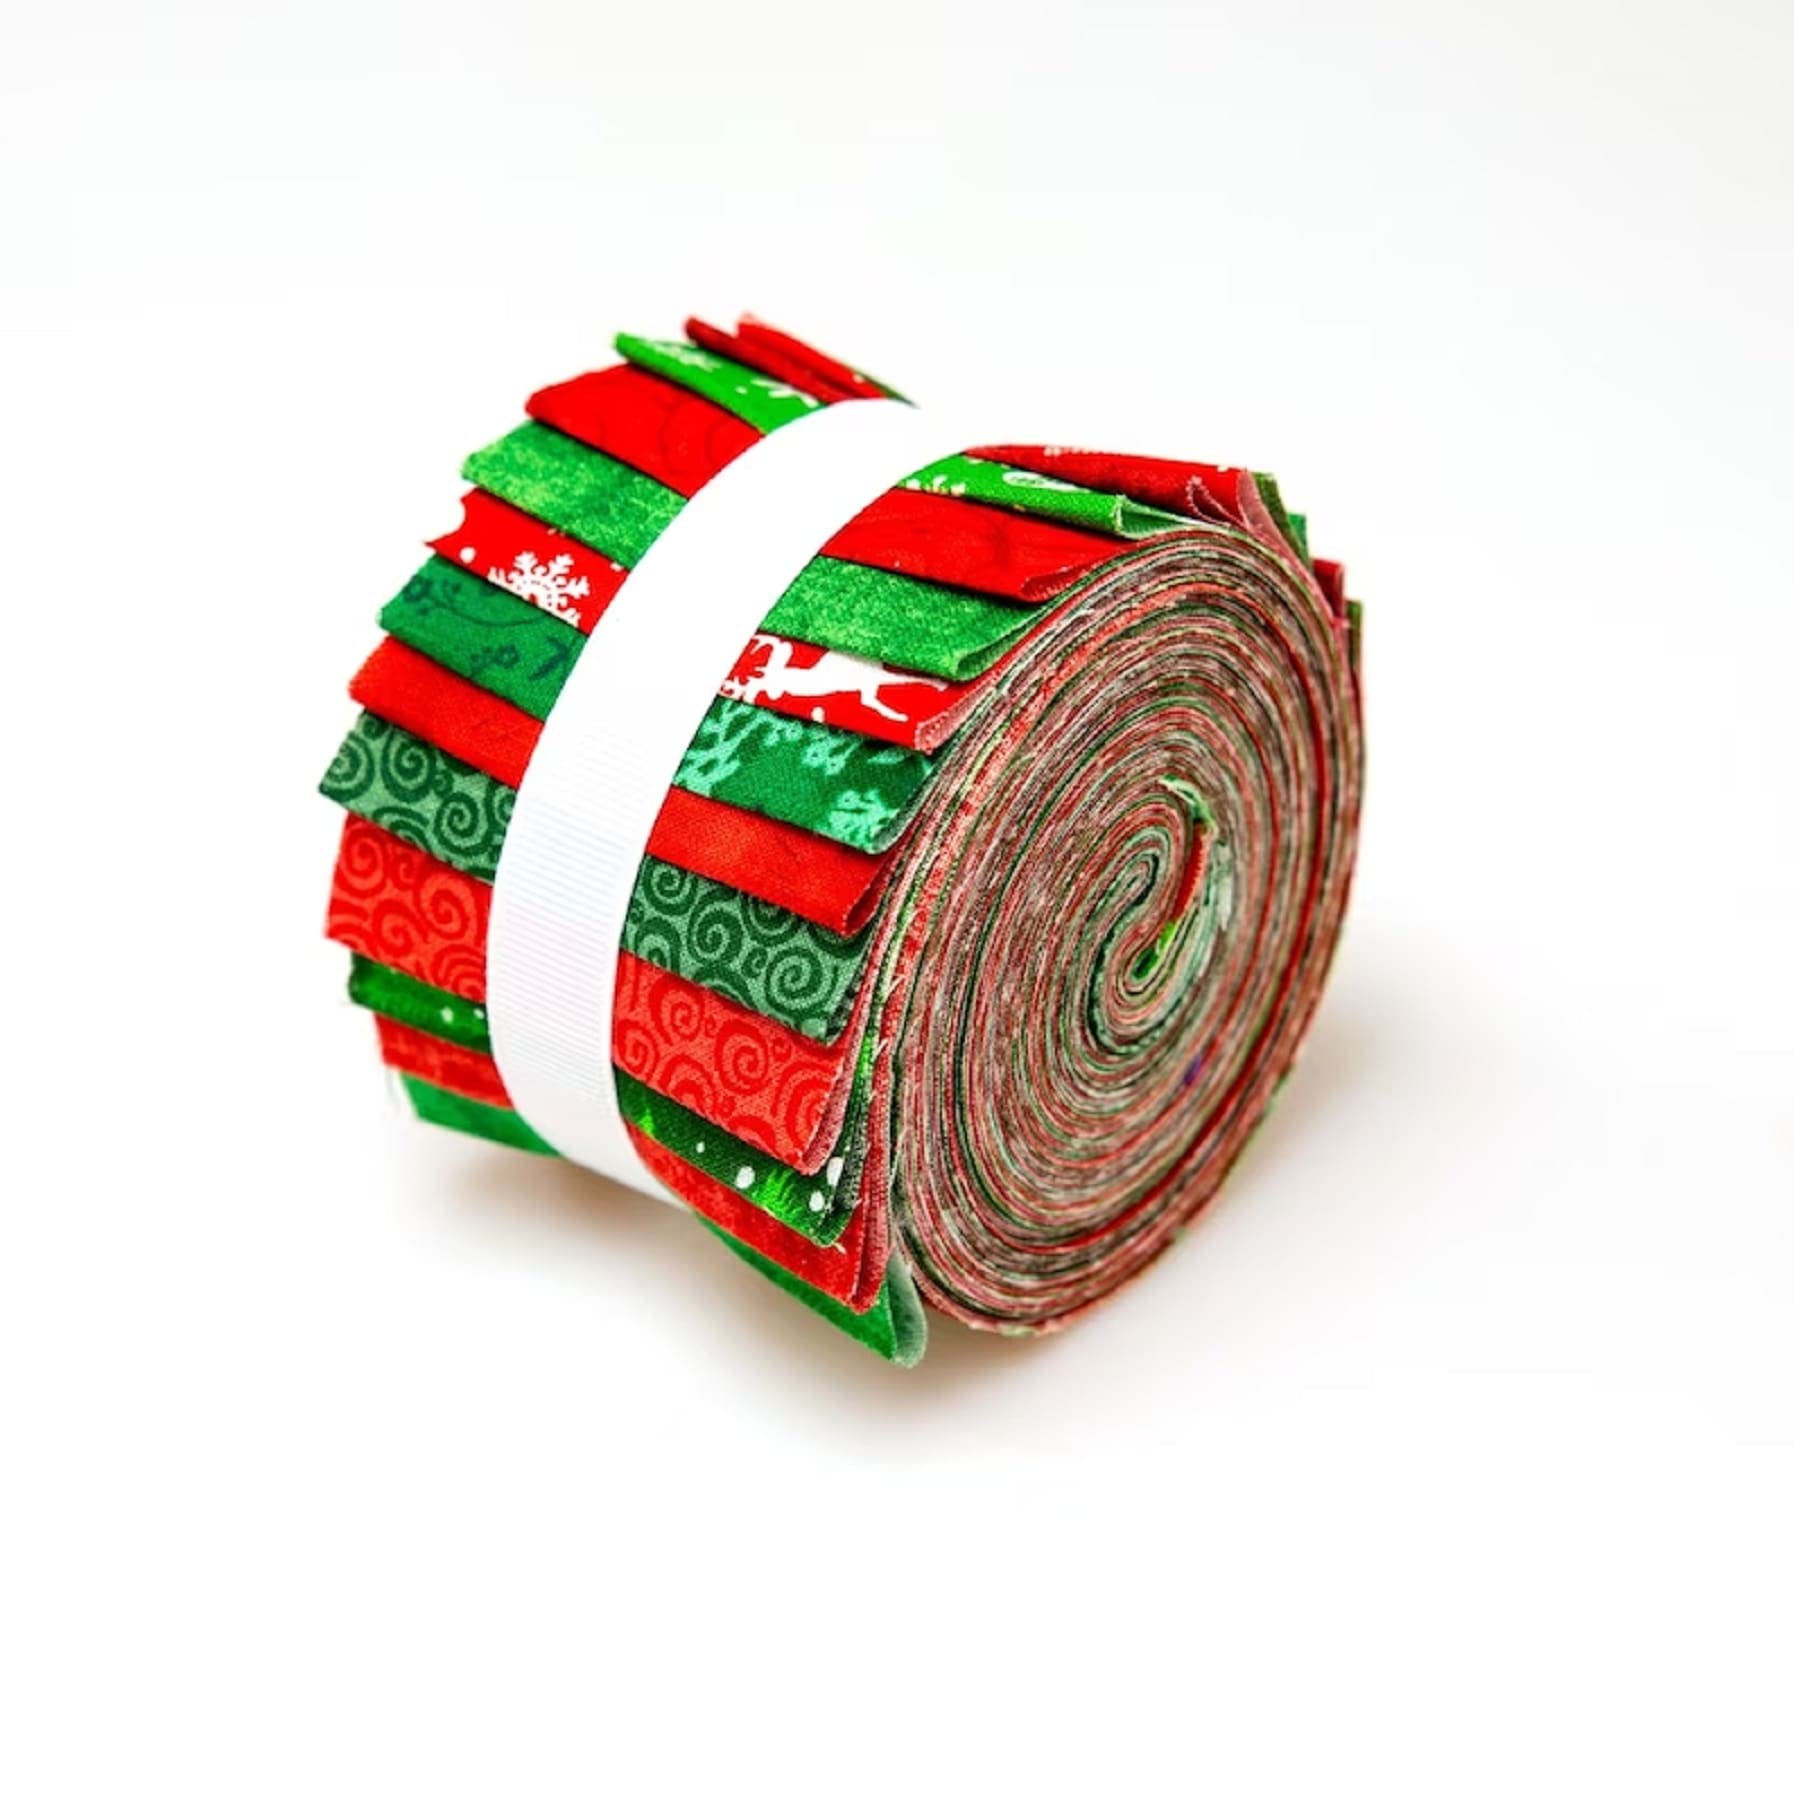 Christmas Basics Red Green Jelly Roll Fabric, 100% Cotton Fabric Quilting Strips, Pre-Cut Fabric, 2.5 inch pre-Cut, 17 Strips